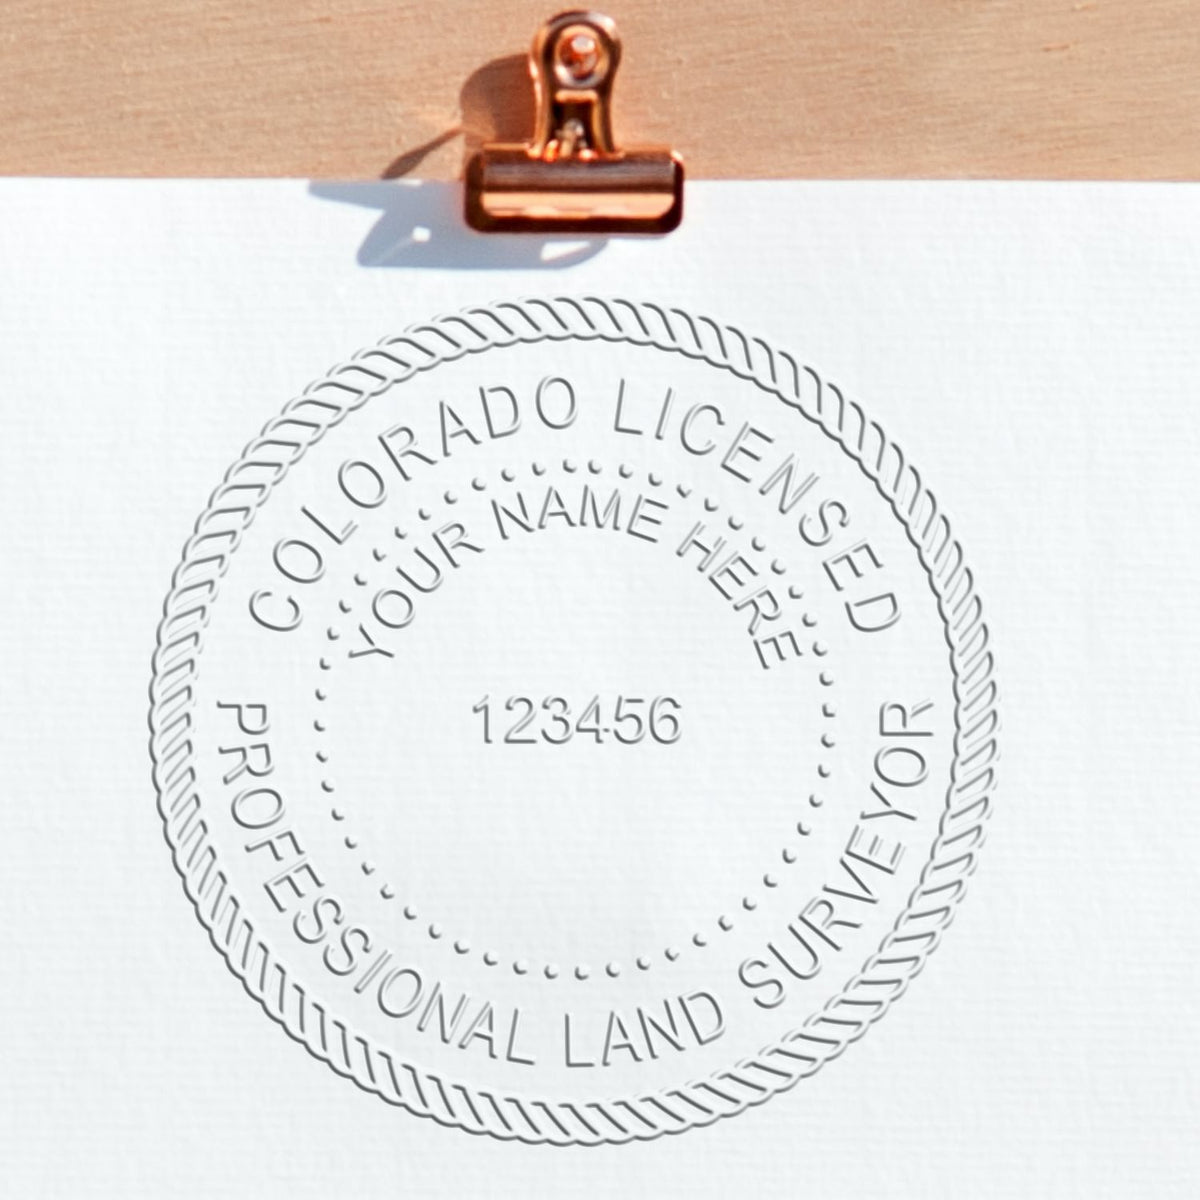 Another Example of a stamped impression of the Heavy Duty Cast Iron Colorado Land Surveyor Seal Embosser on a piece of office paper.